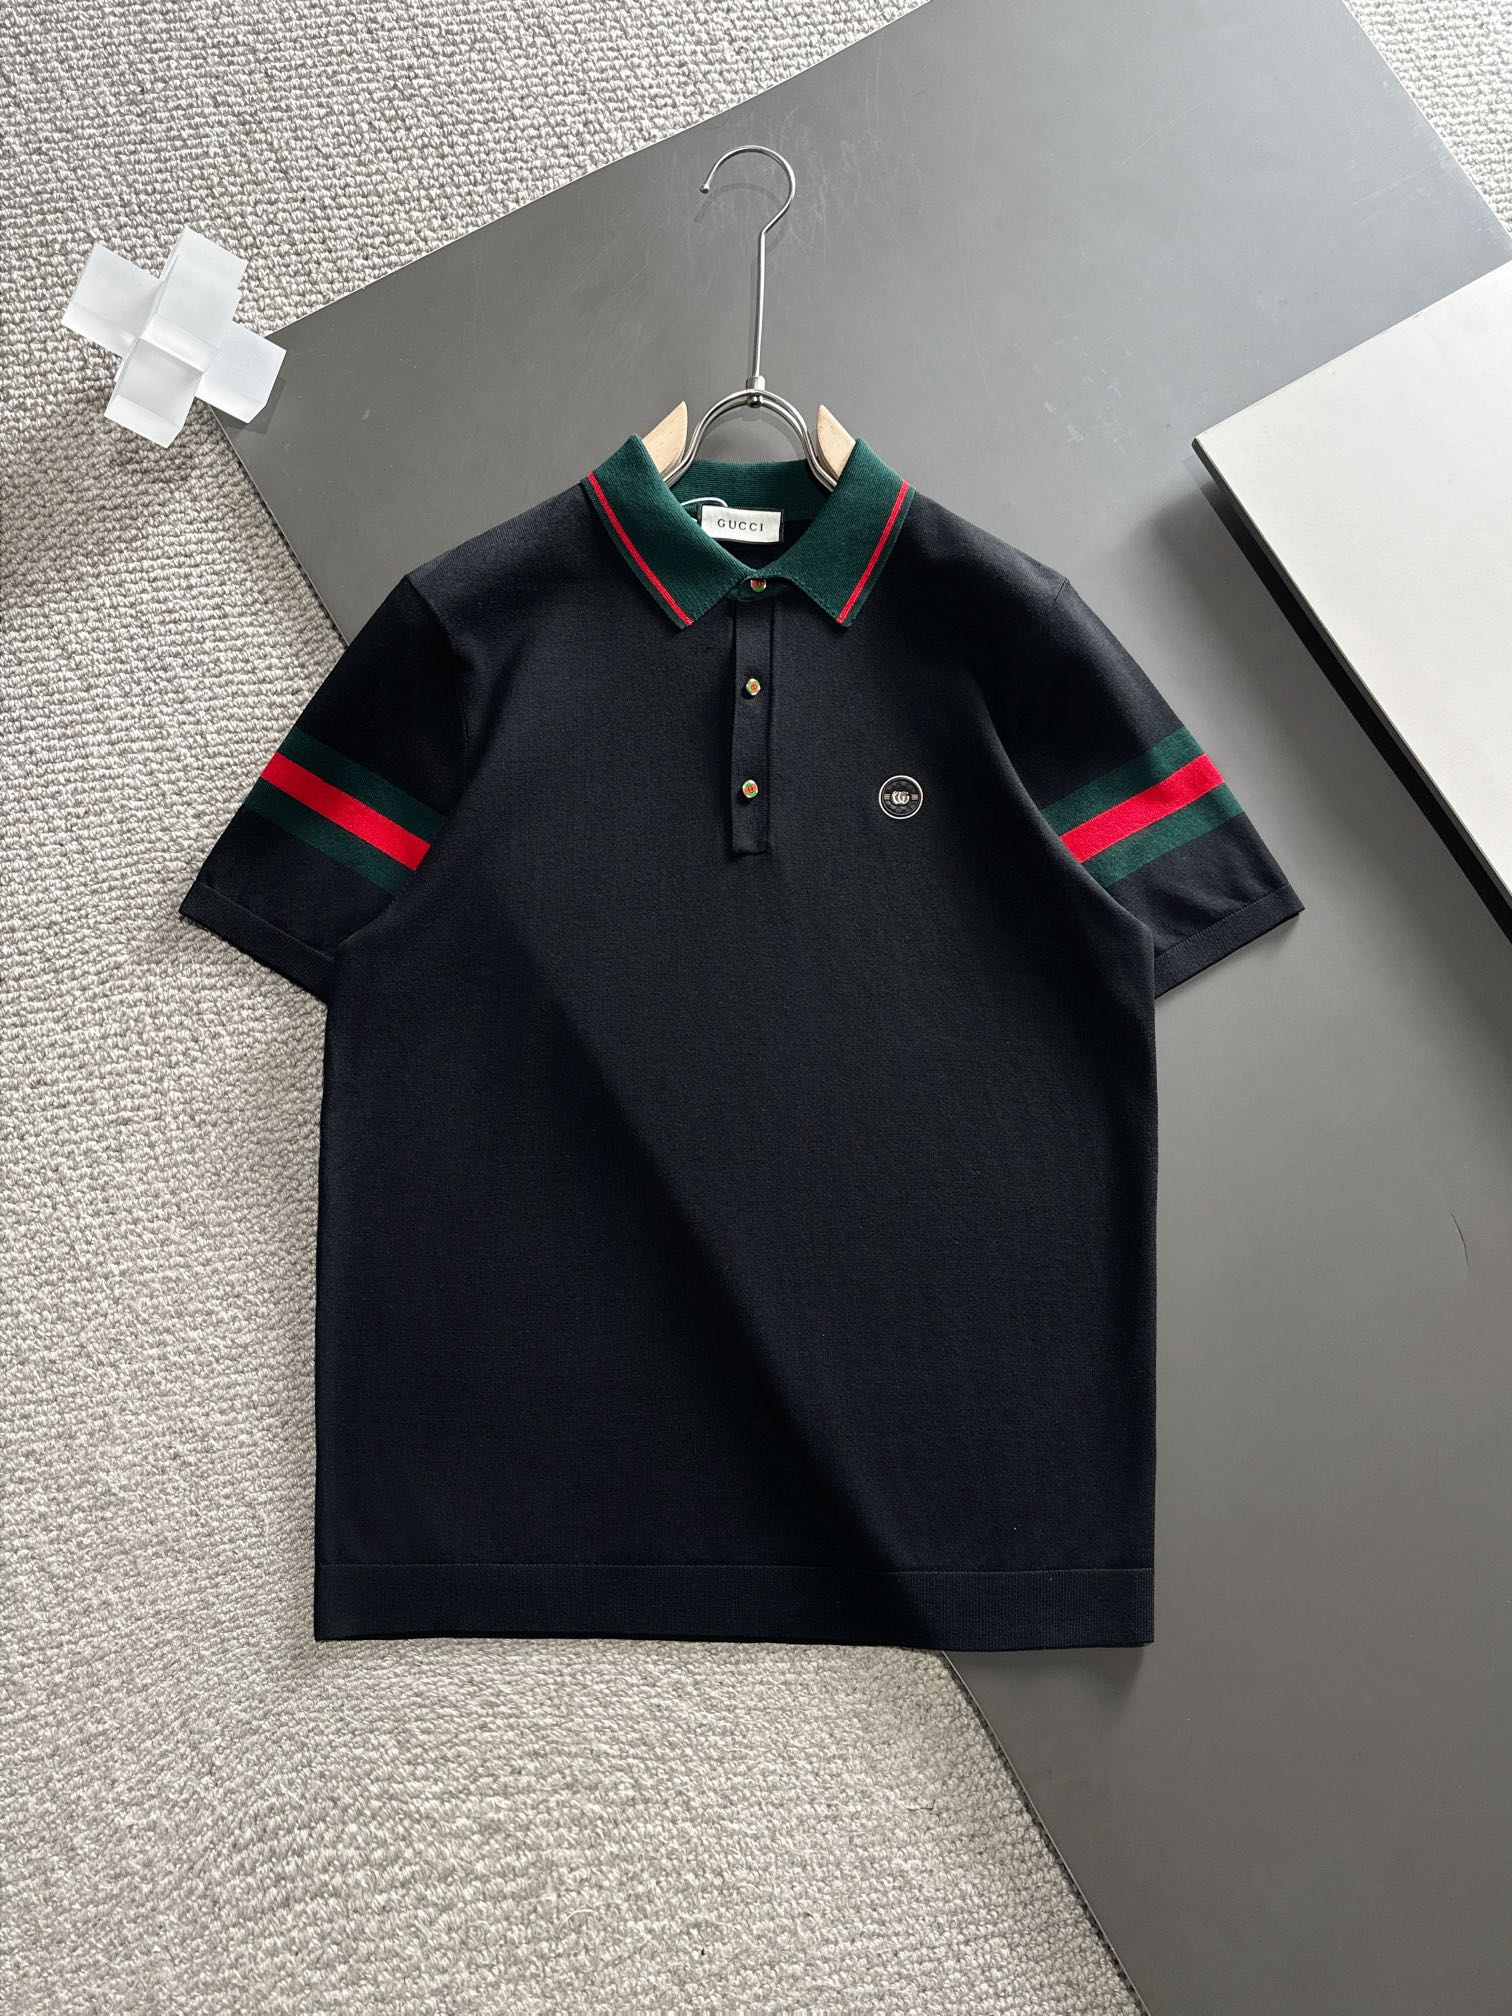 Gucci Clothing Polo T-Shirt Fall Collection Fashion Short Sleeve